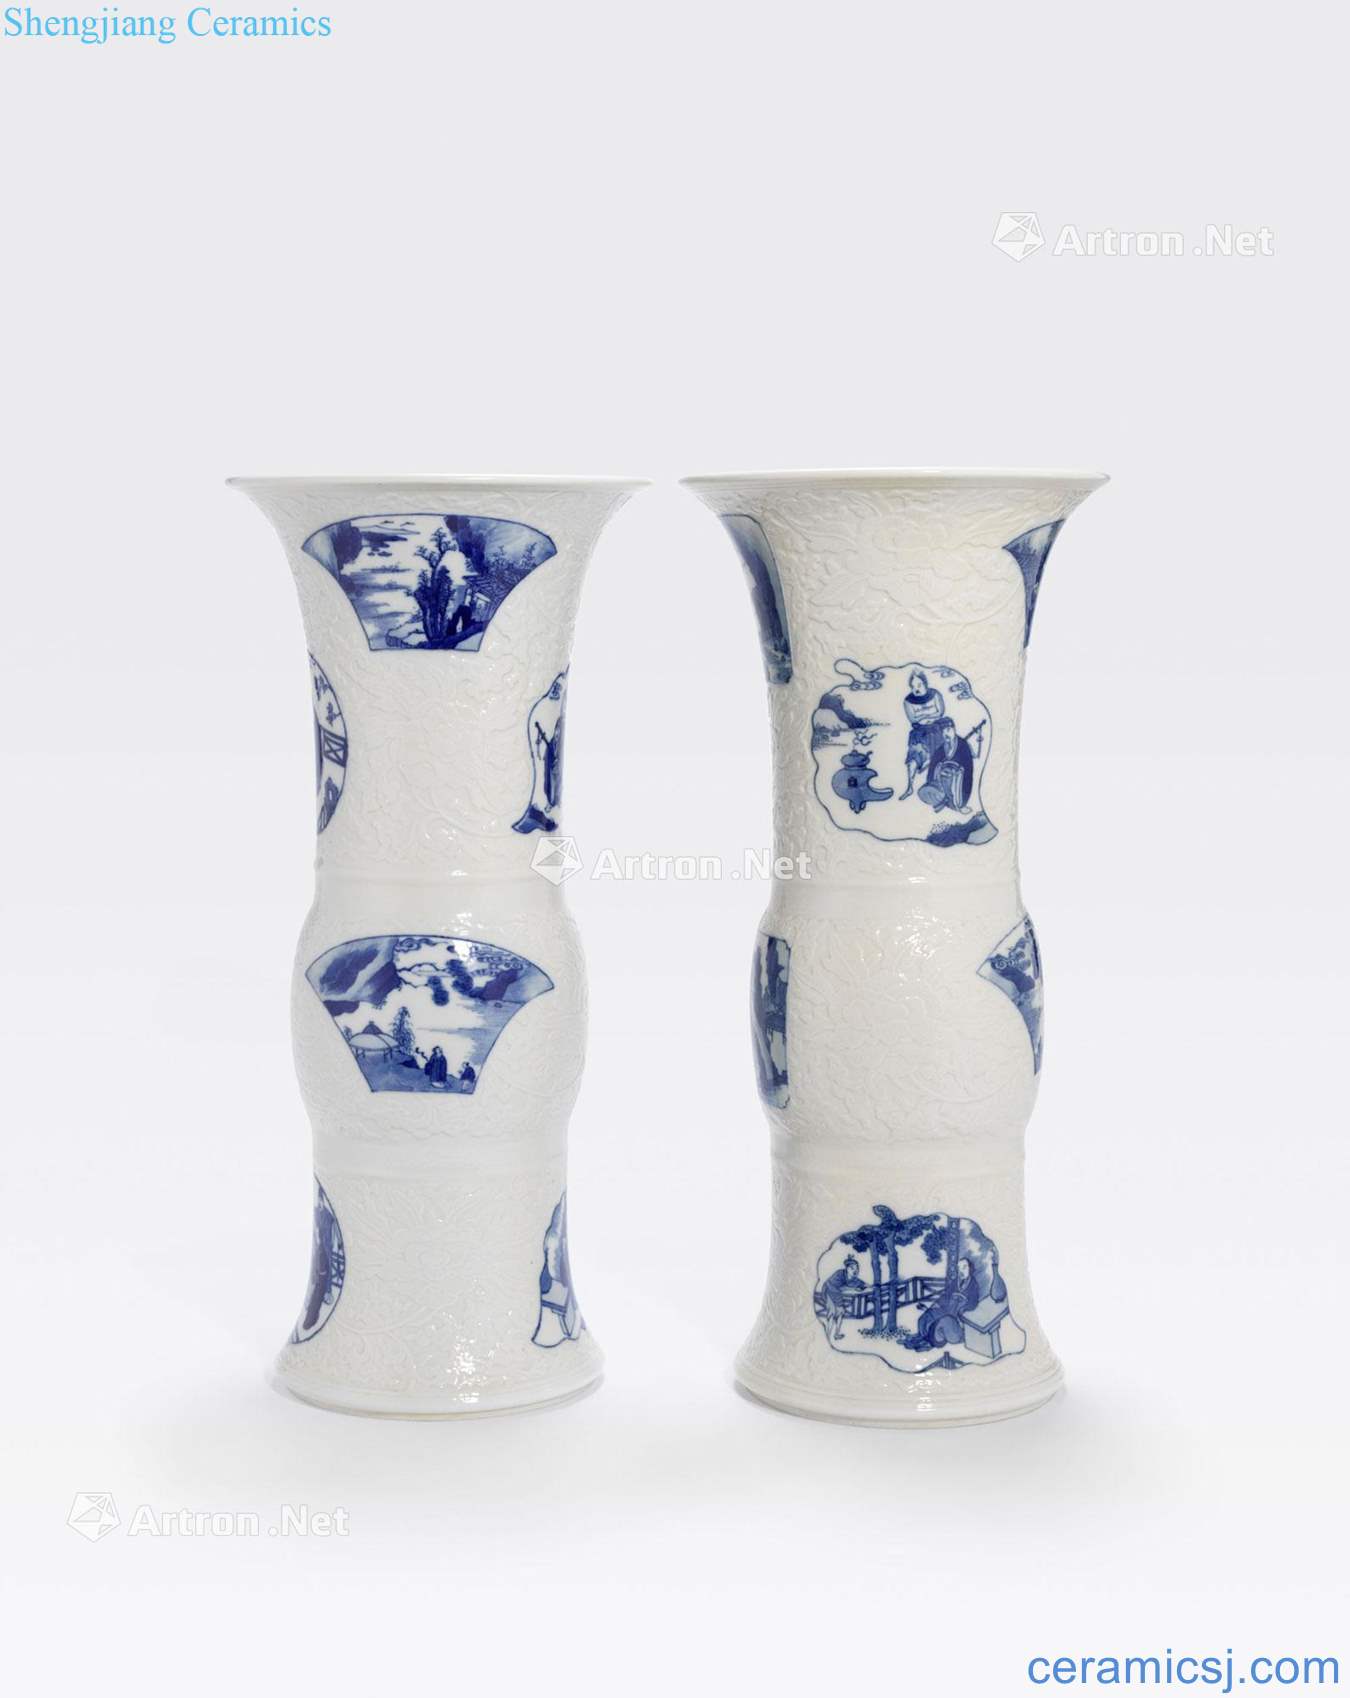 Kangxi period A PAIR OF MOLDED BLUE AND WHITE PORCELAIN BEAKER VASES